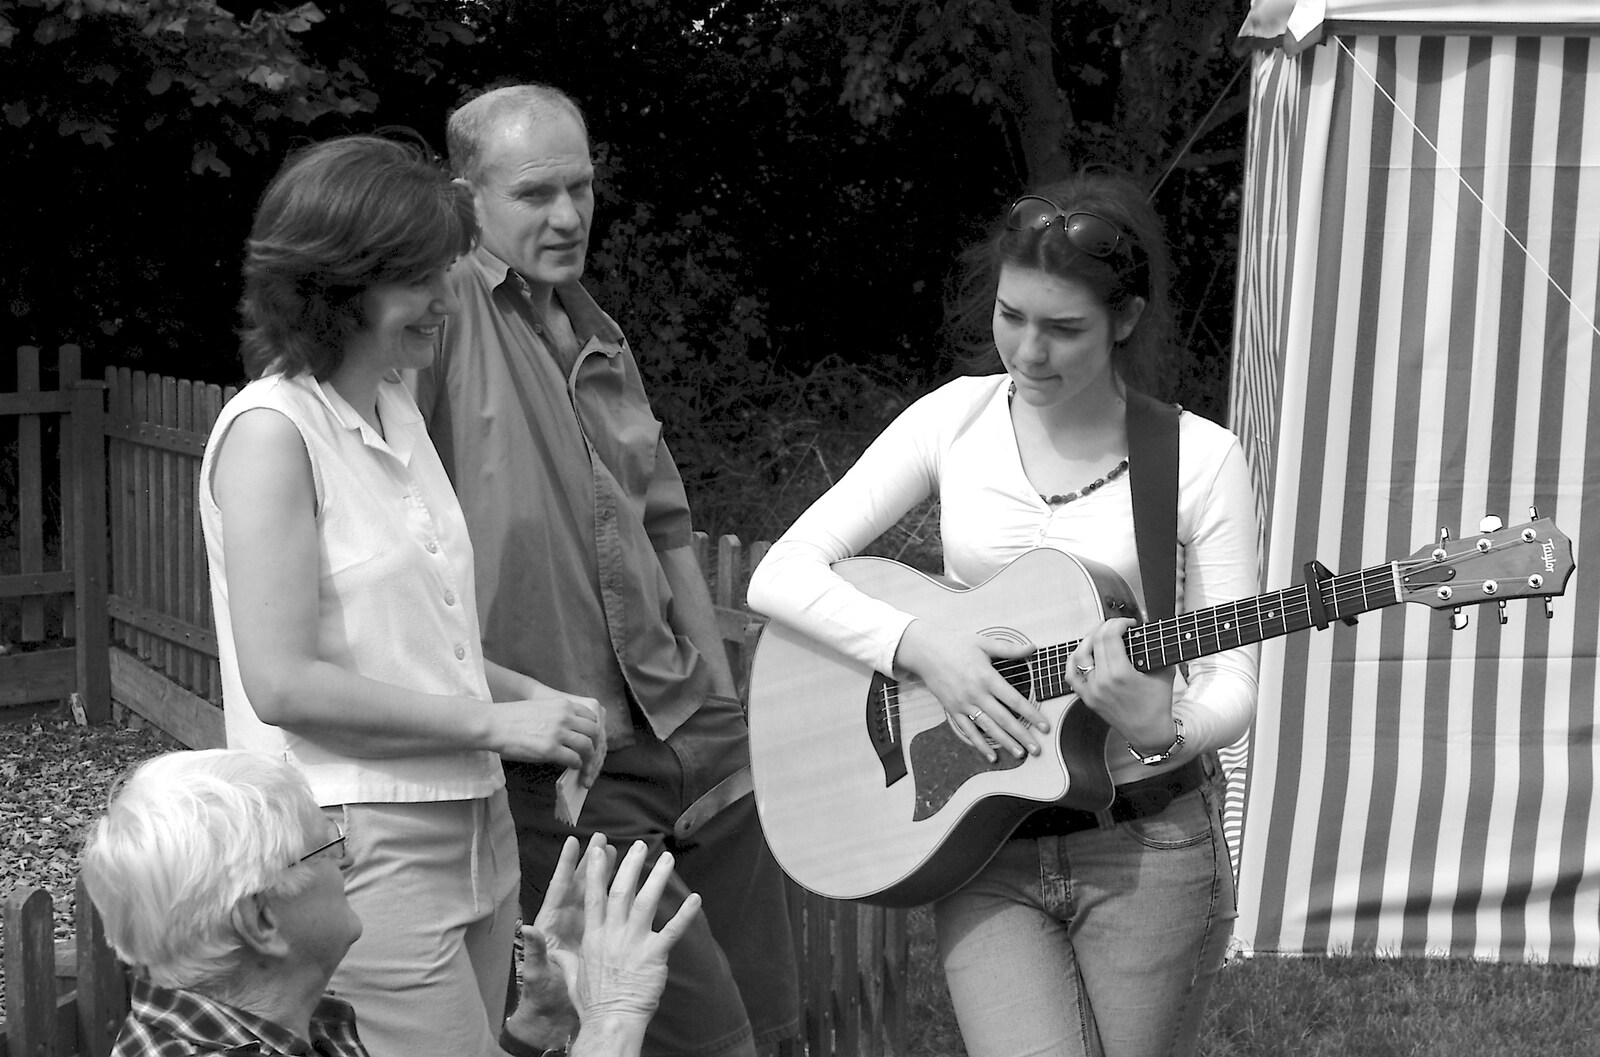 Daisy and parents from The Village Fête, Yaxley, Suffolk - 18th June 2006